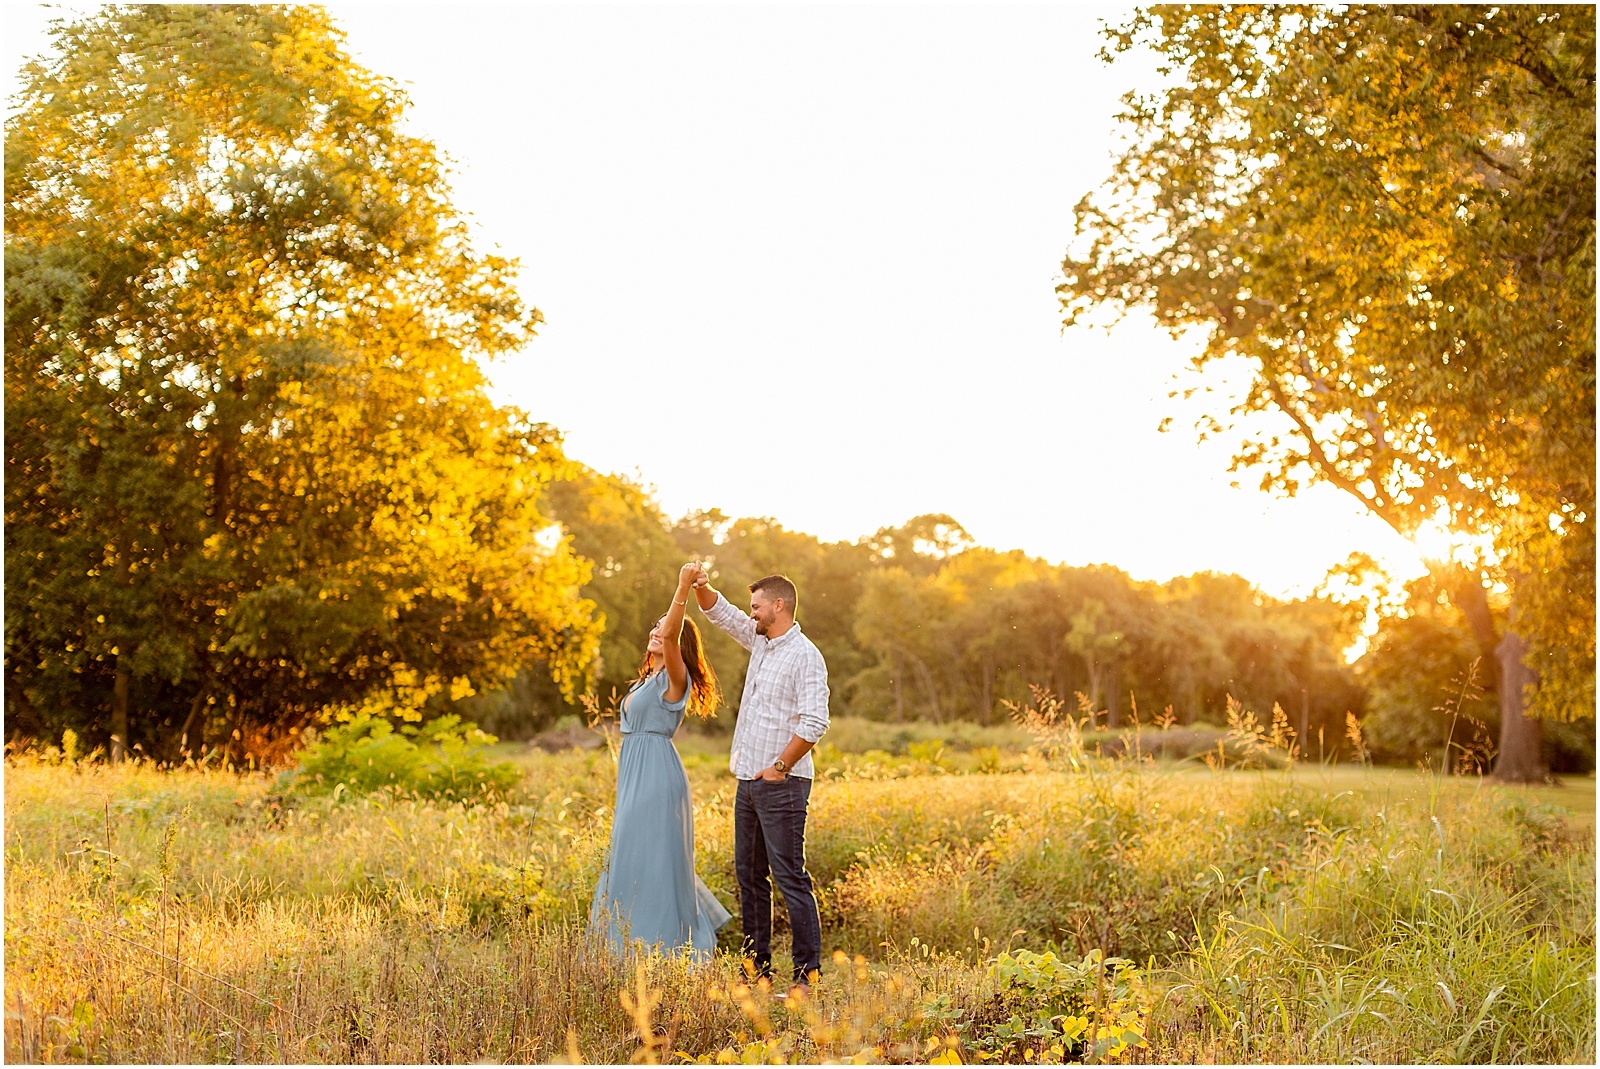 Sally and Andrew's Anniversary Session in New Harmony |Bret and Brandie Photography0017.jpg